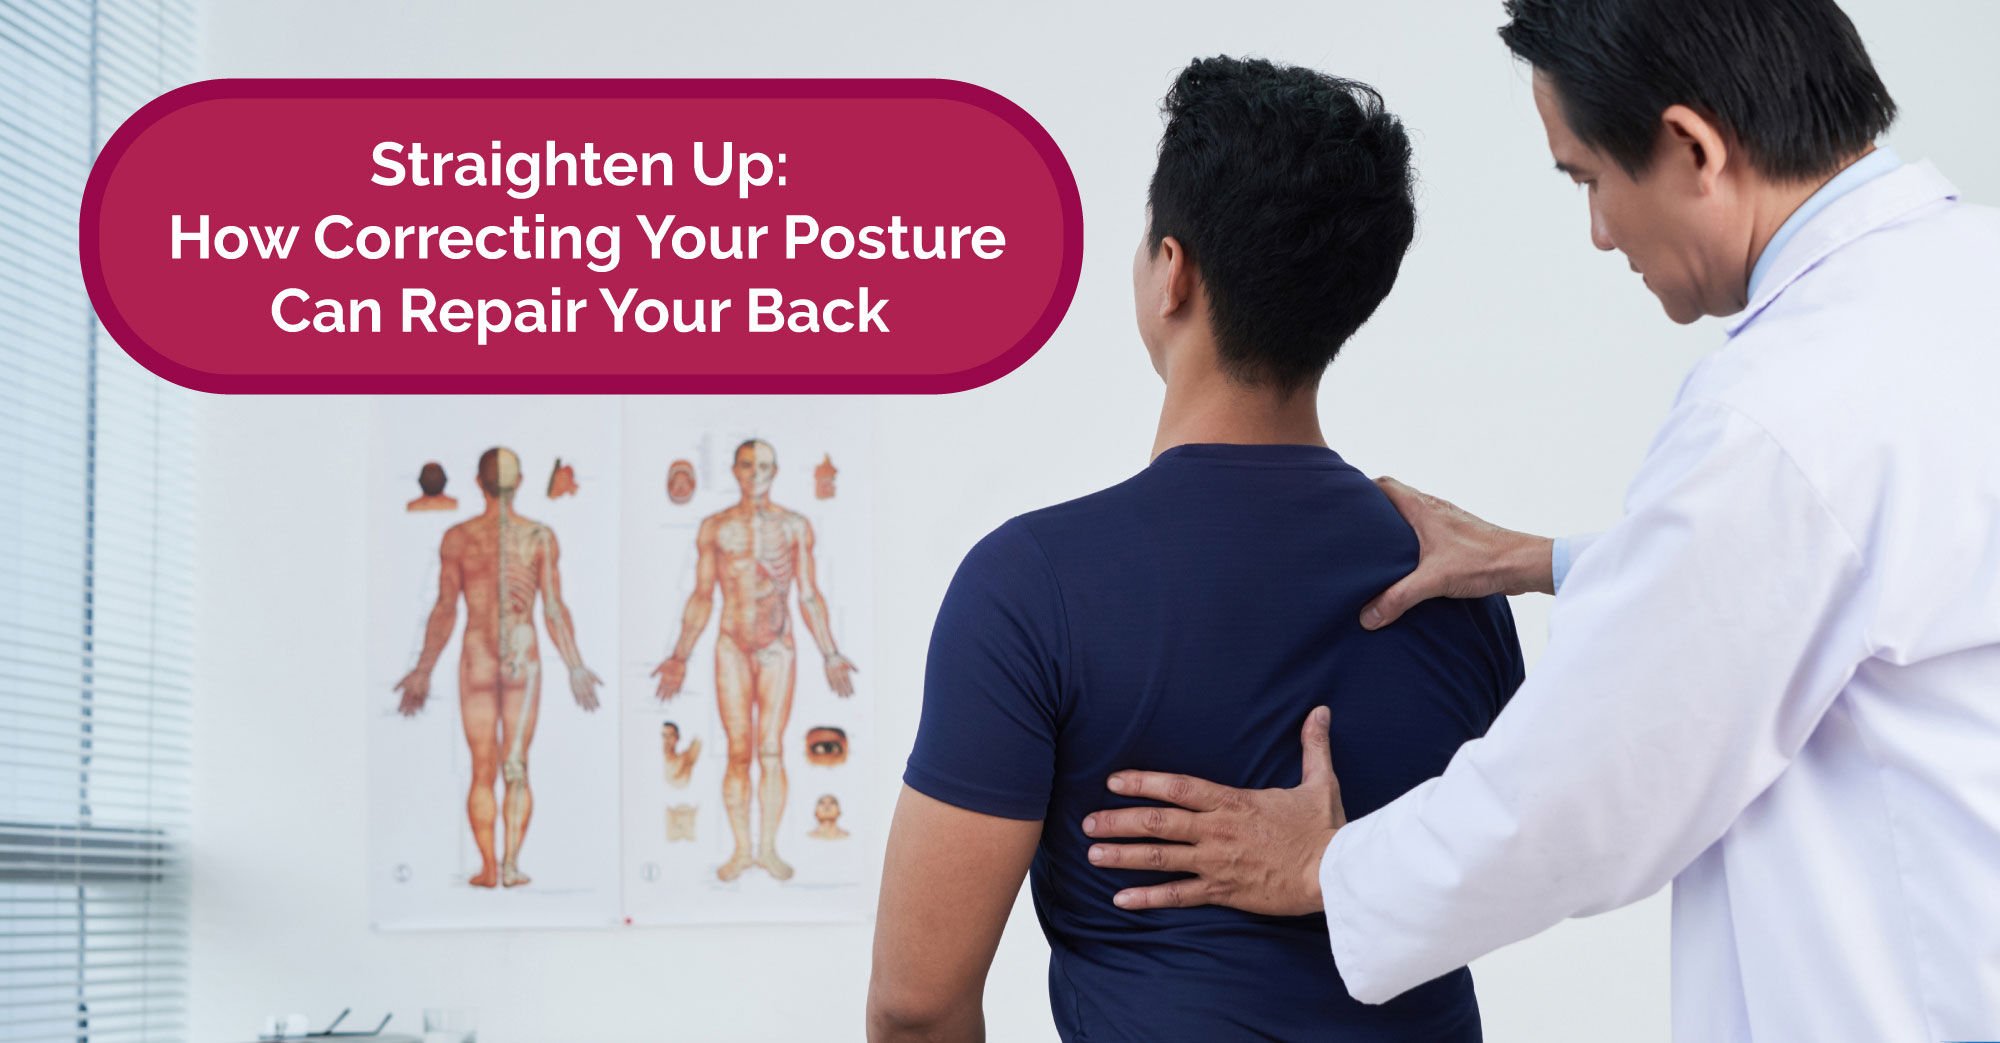 How Correcting Your Posture Can Repair Your Back - Physiotherapy,  Chiropractor and Custom Orthotics